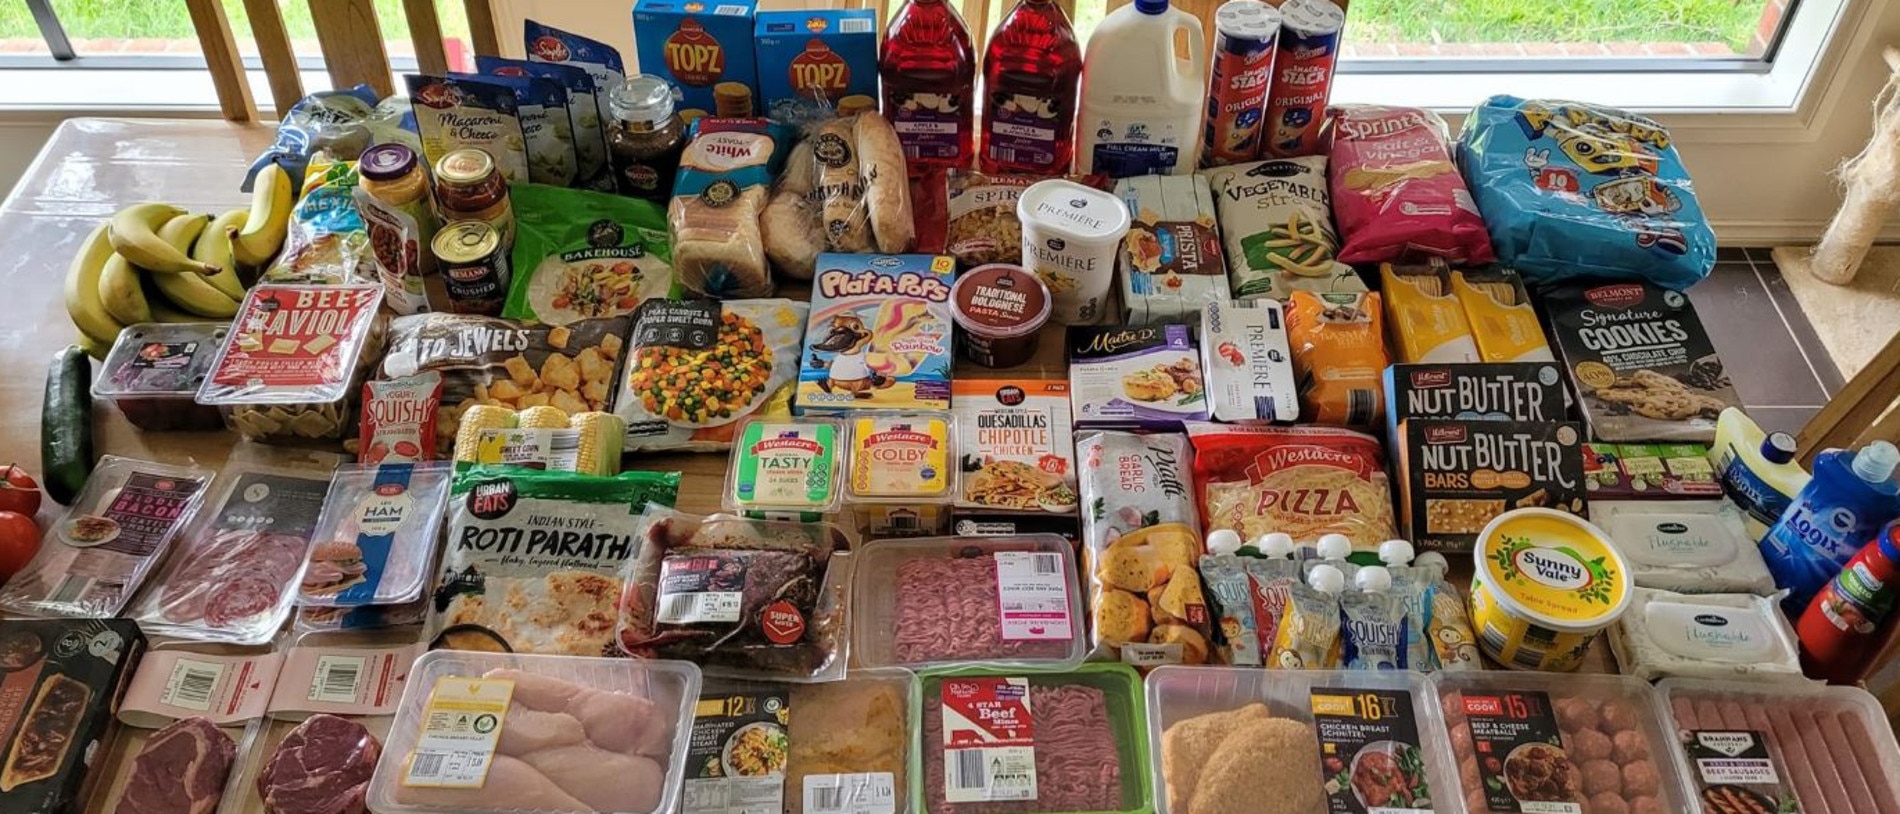 The woman shared a picture of her Aldi shop on Facebook, asking people to guess how much she had spent. Picture: Facebook/Aldi Mums.